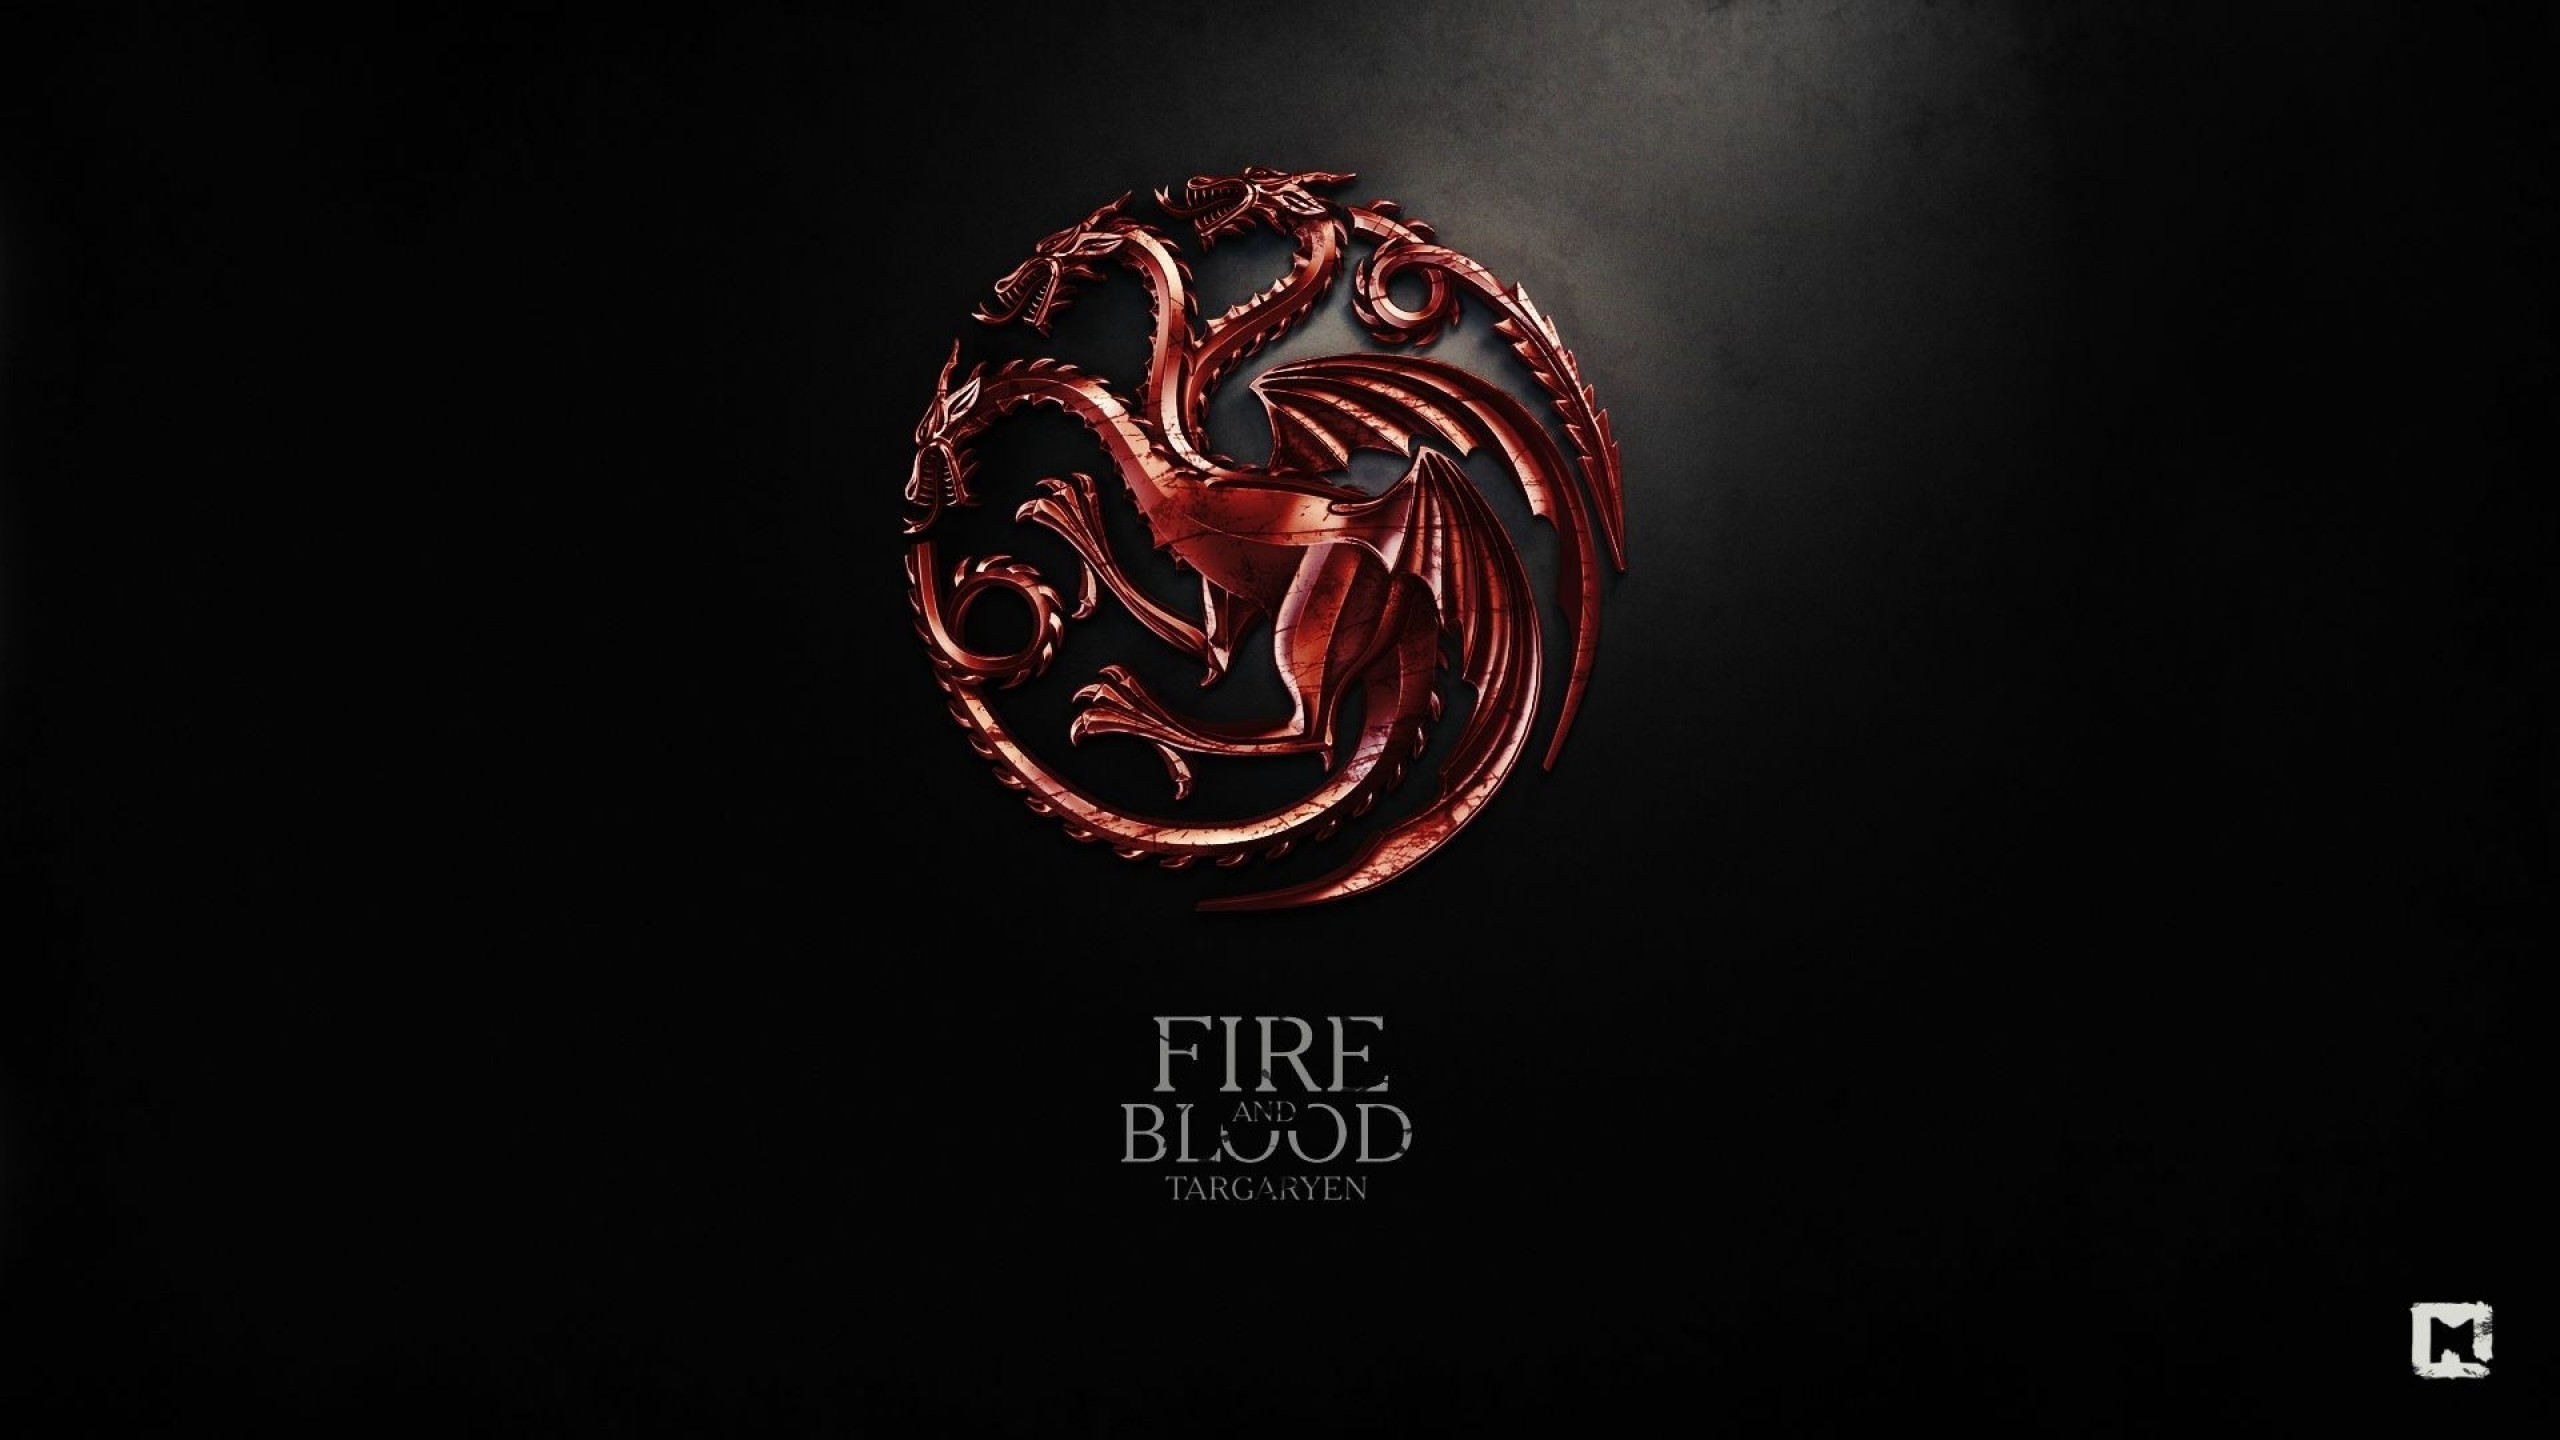 Red Game Of Thrones Tv Series House Targaryen Fire And Blood